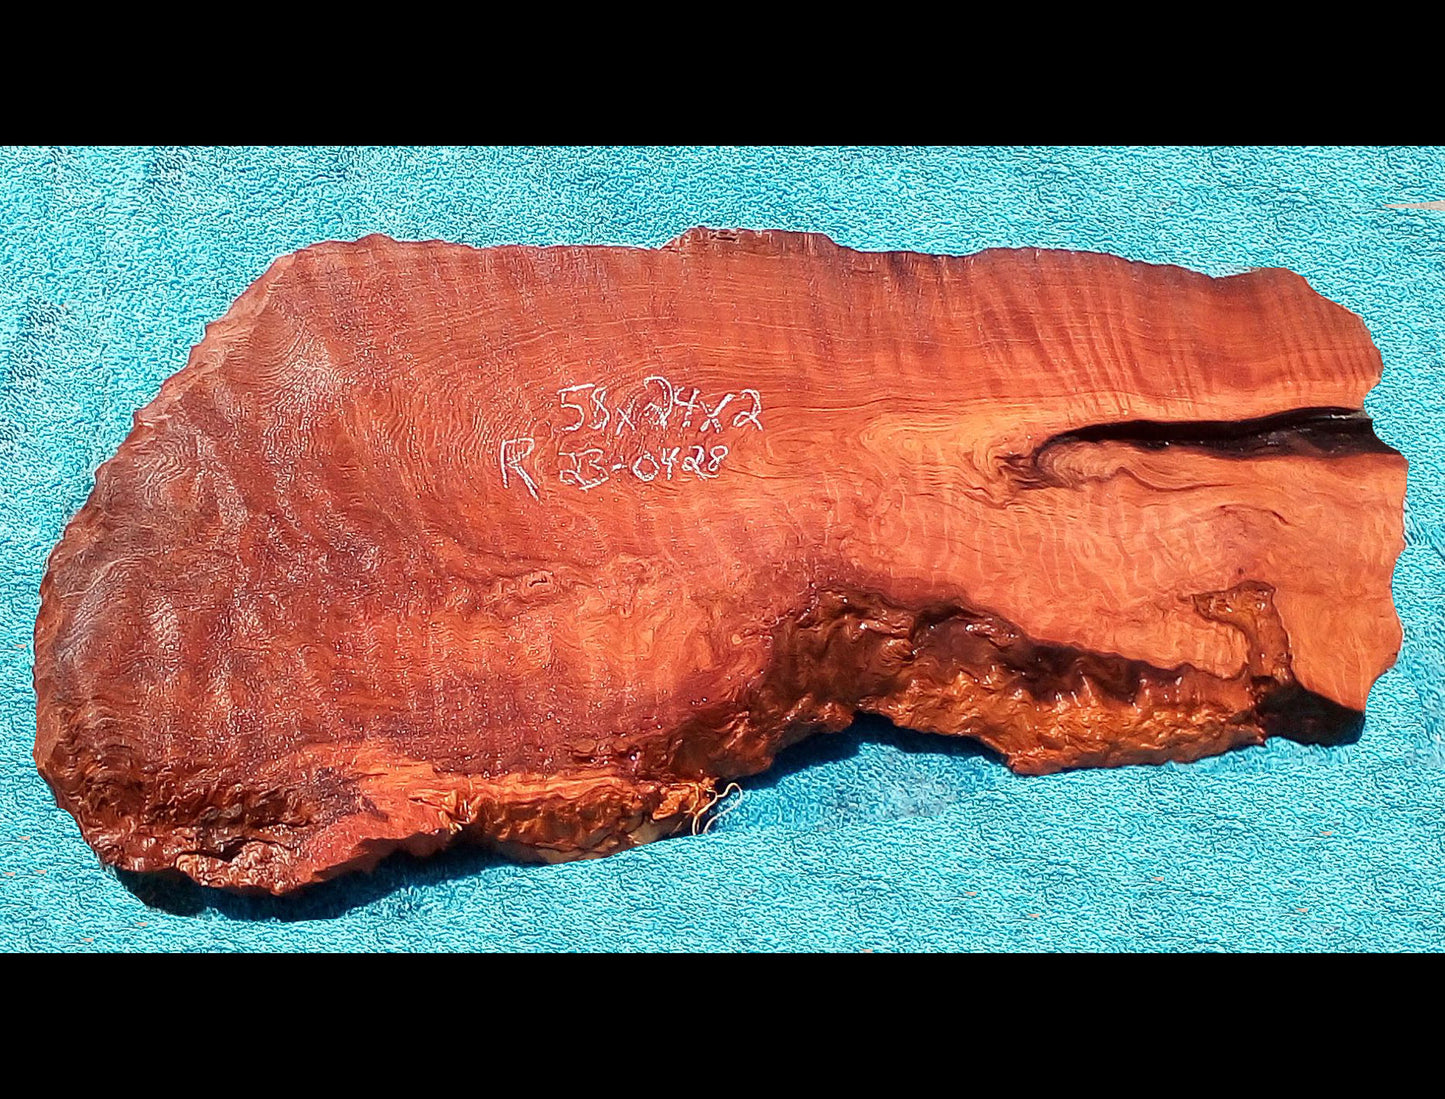 quilted curly Redwood | live edge slab | DIY wood crafts |  burl table | r23-0428